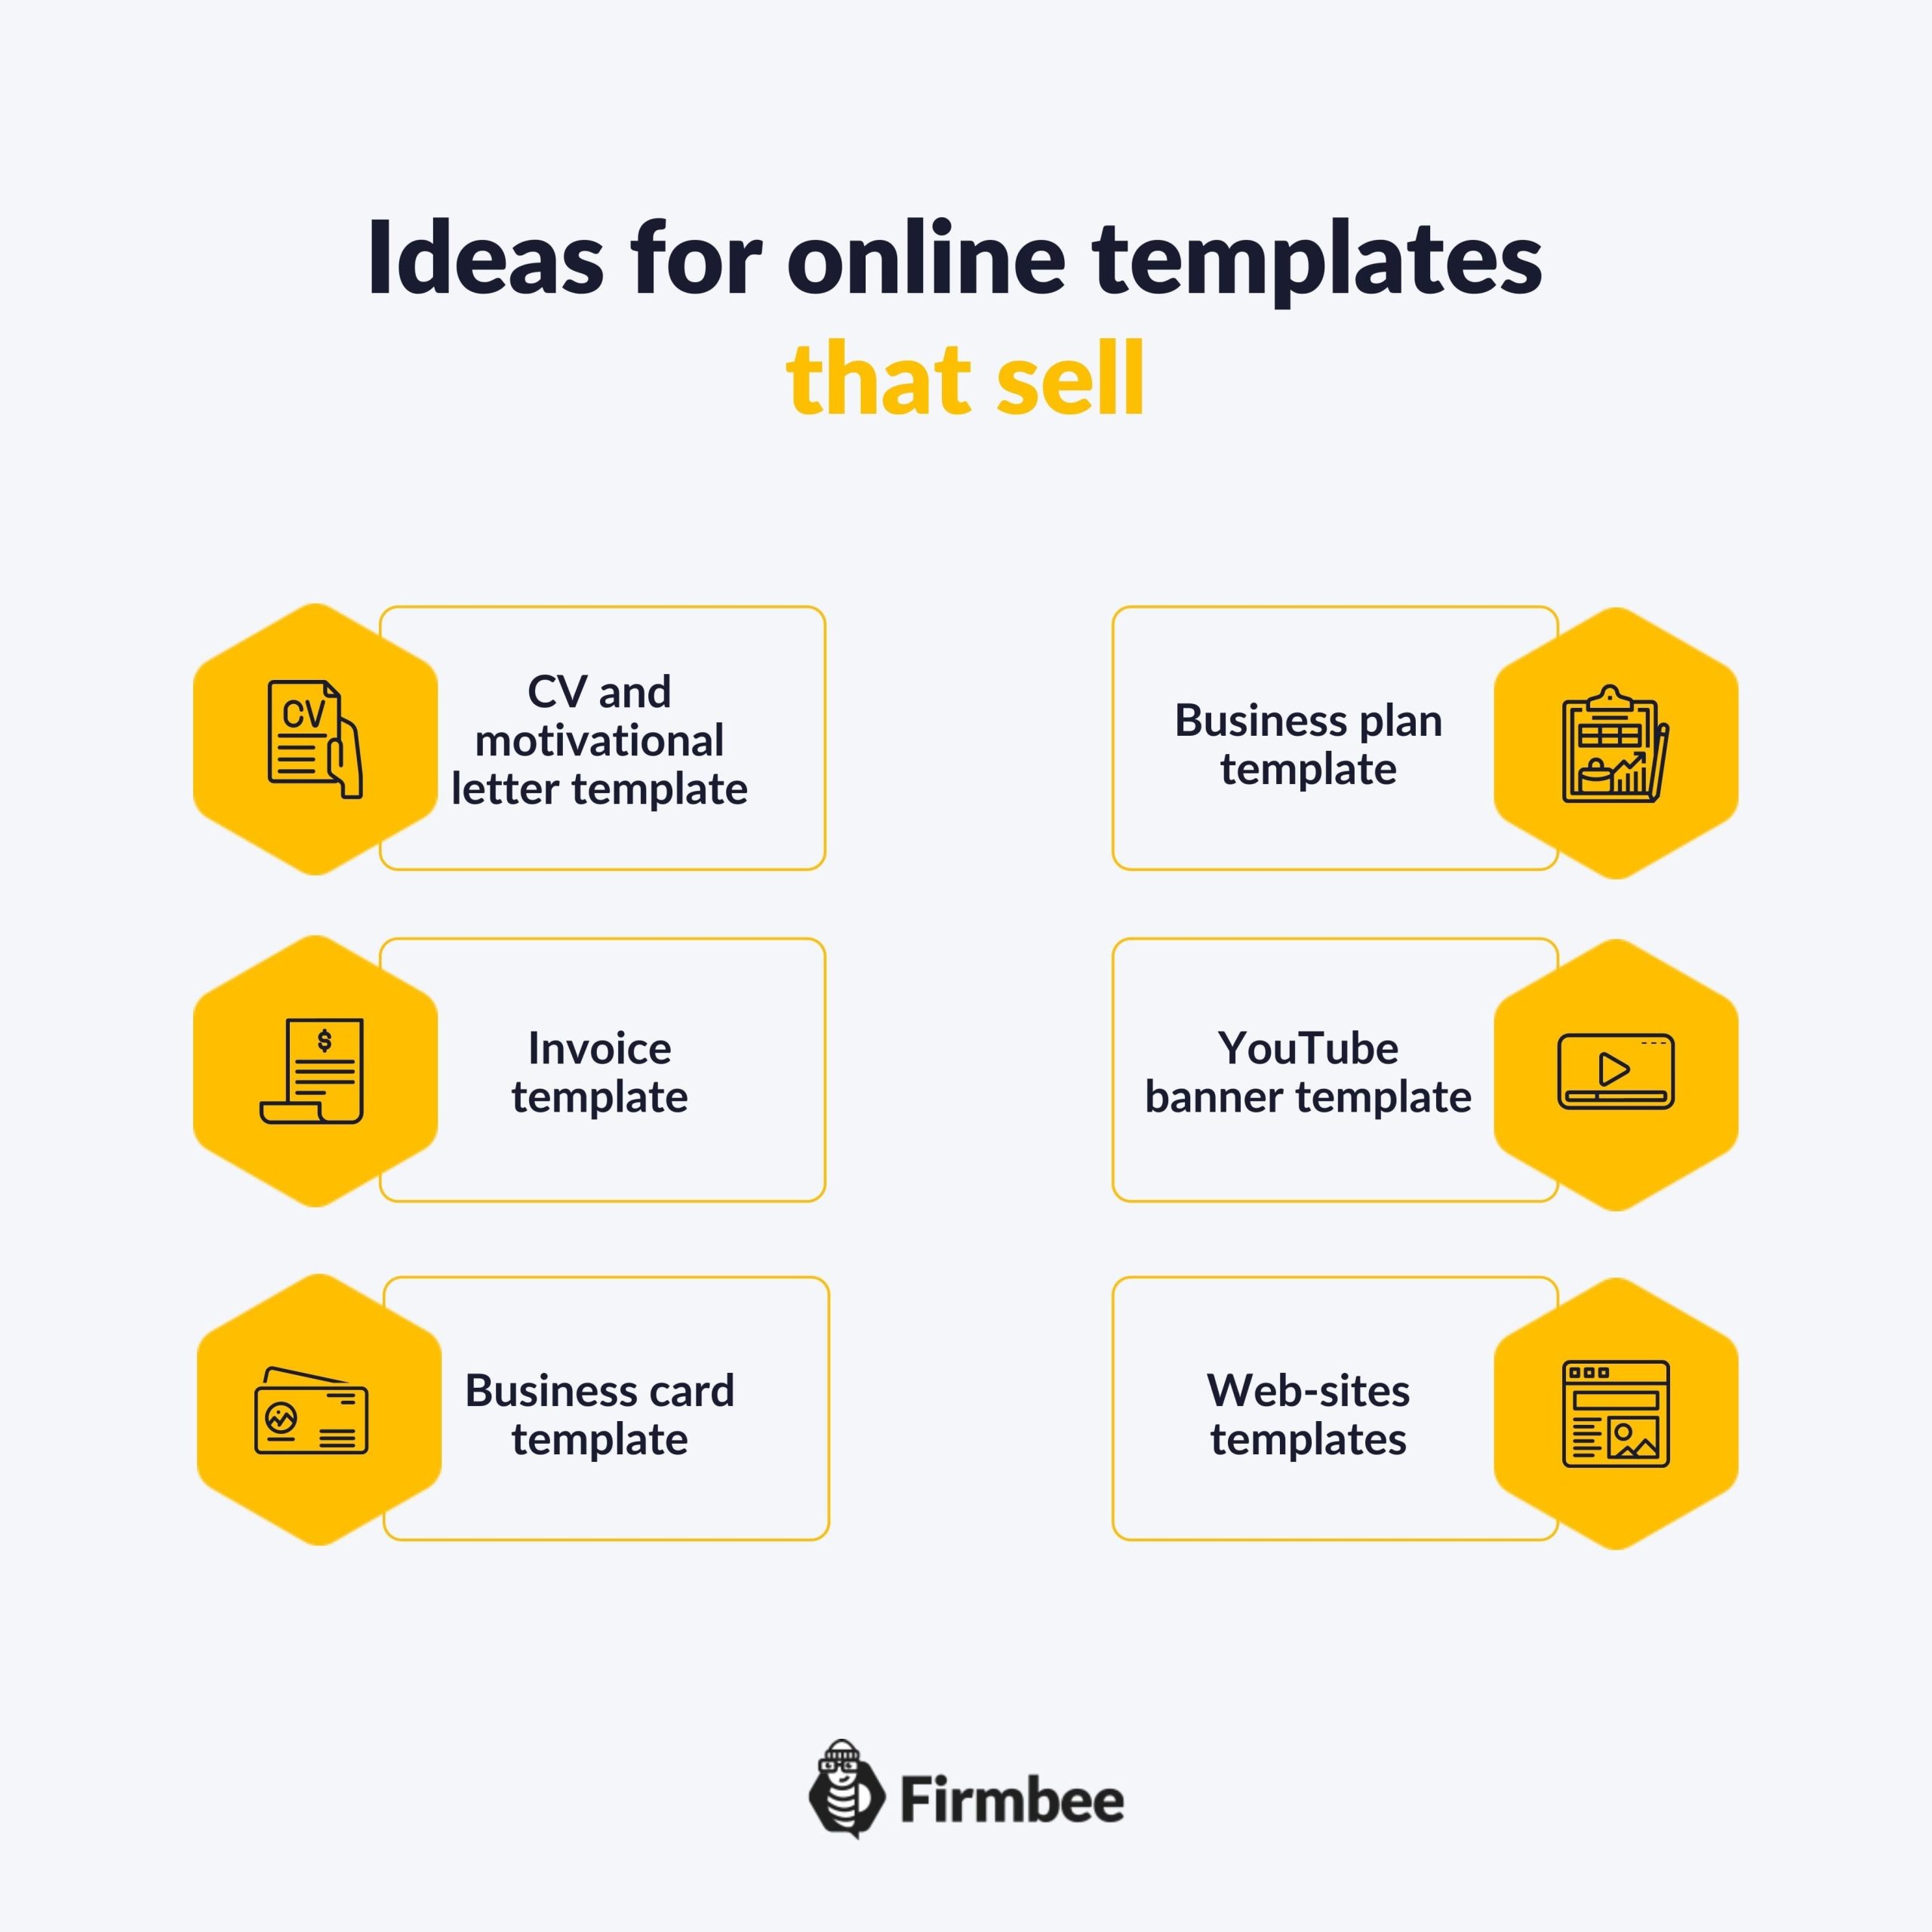 Ideas for online templates that sell